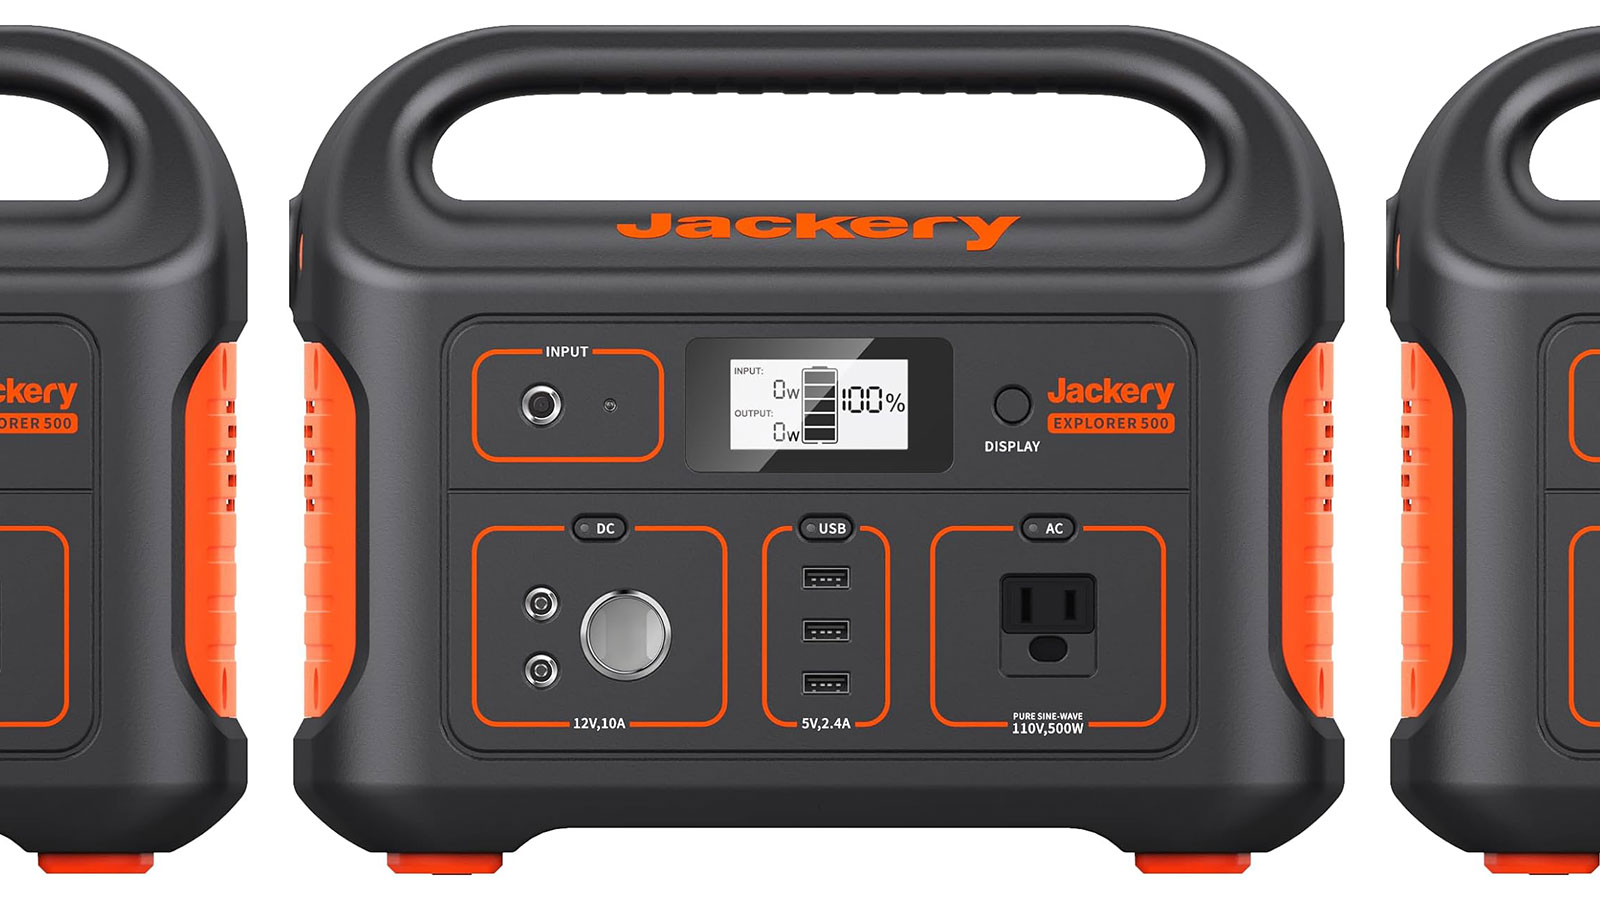 This Jackery power plant has never been cheaper